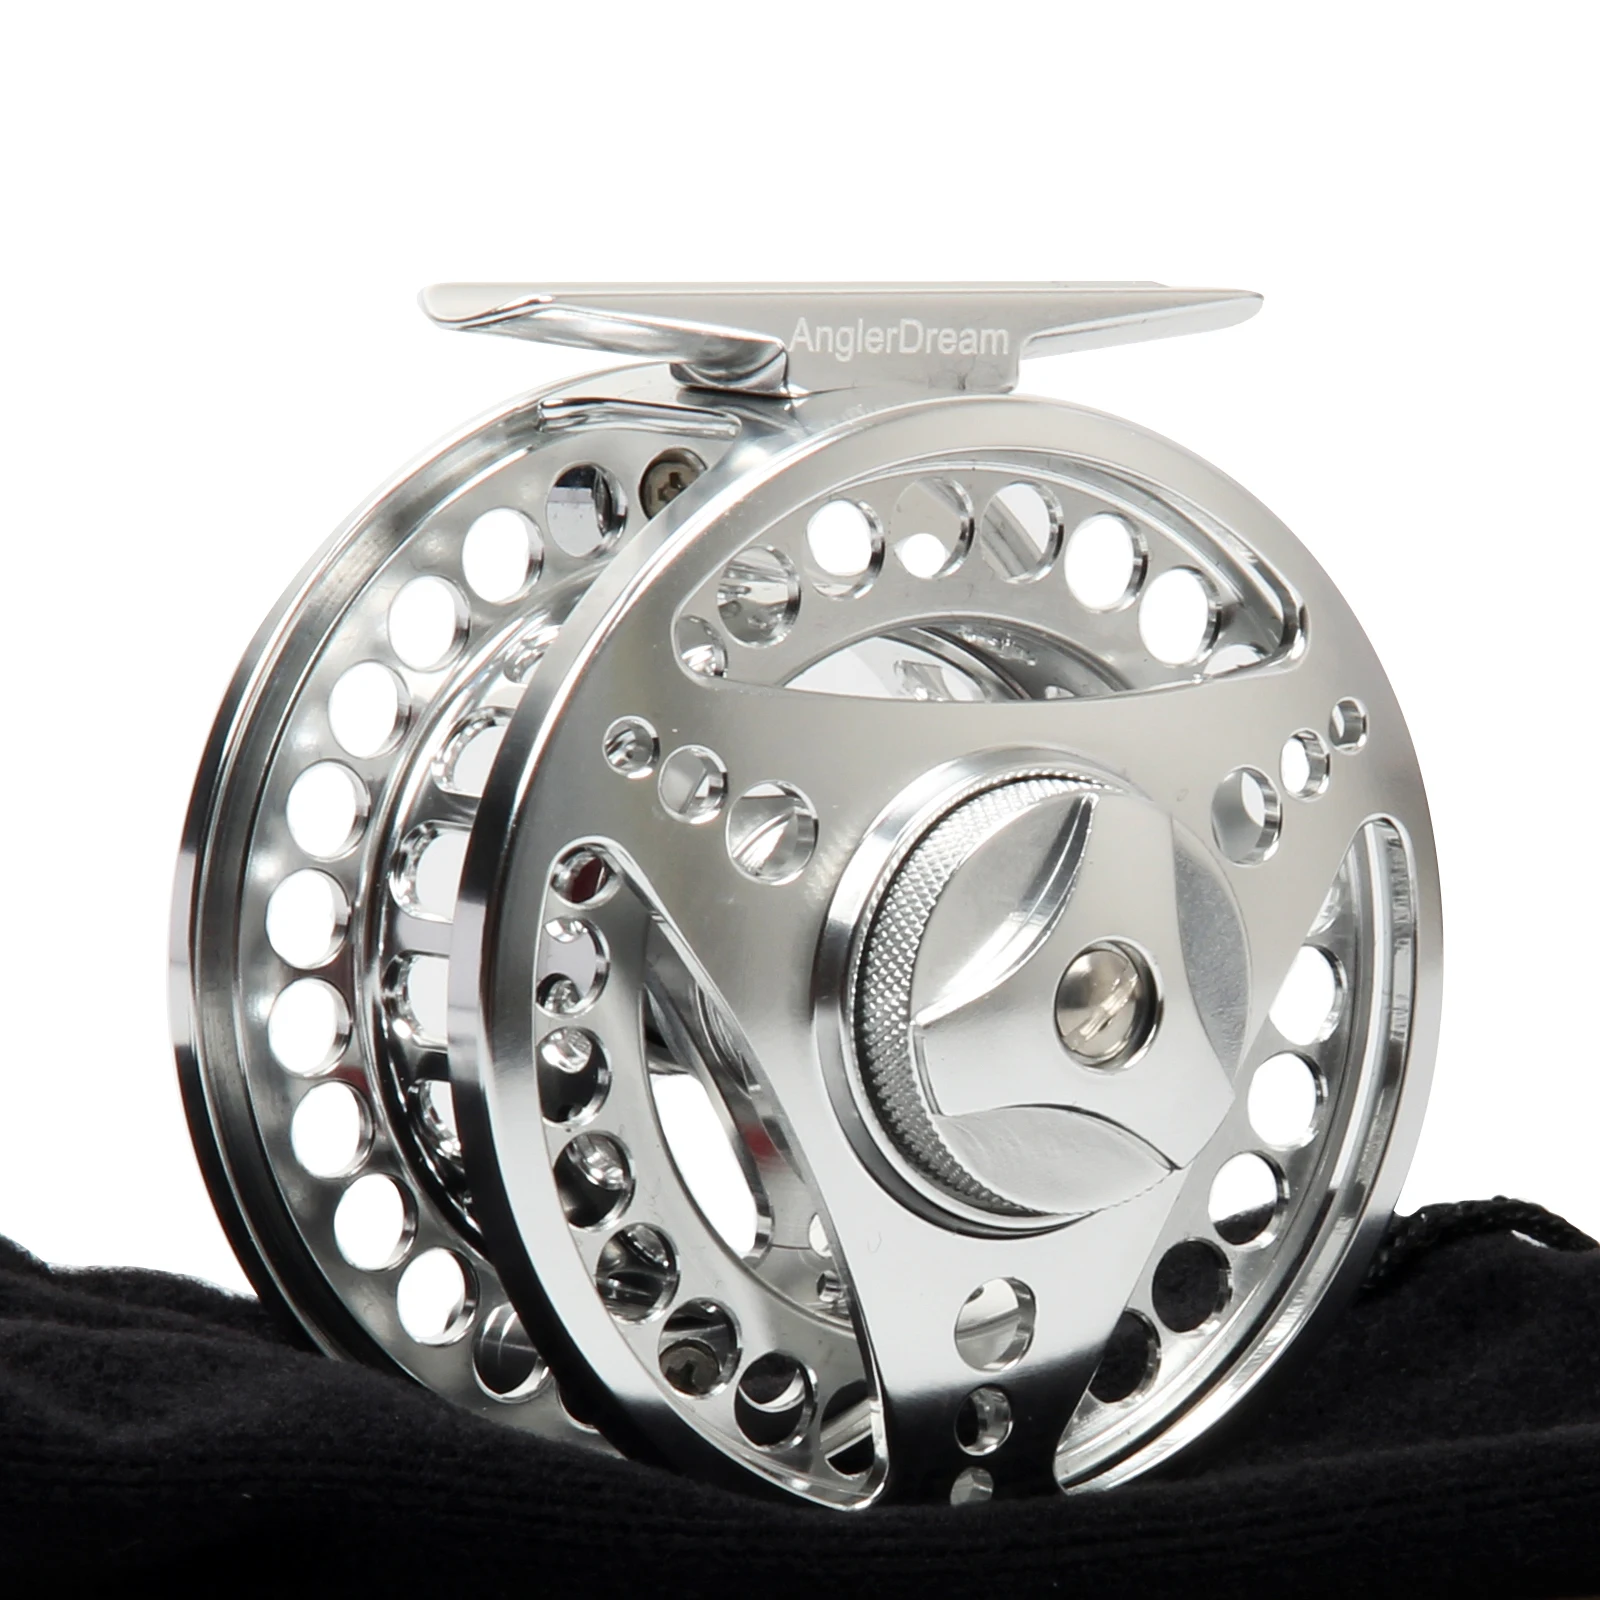 

Fly Fishing Reel EX-ALC 3/4 5/6 7/8 9/10 WT Fly fishing reel CNC Machined Fly Reel Large Arbor Design Light Weight Fishing Reels